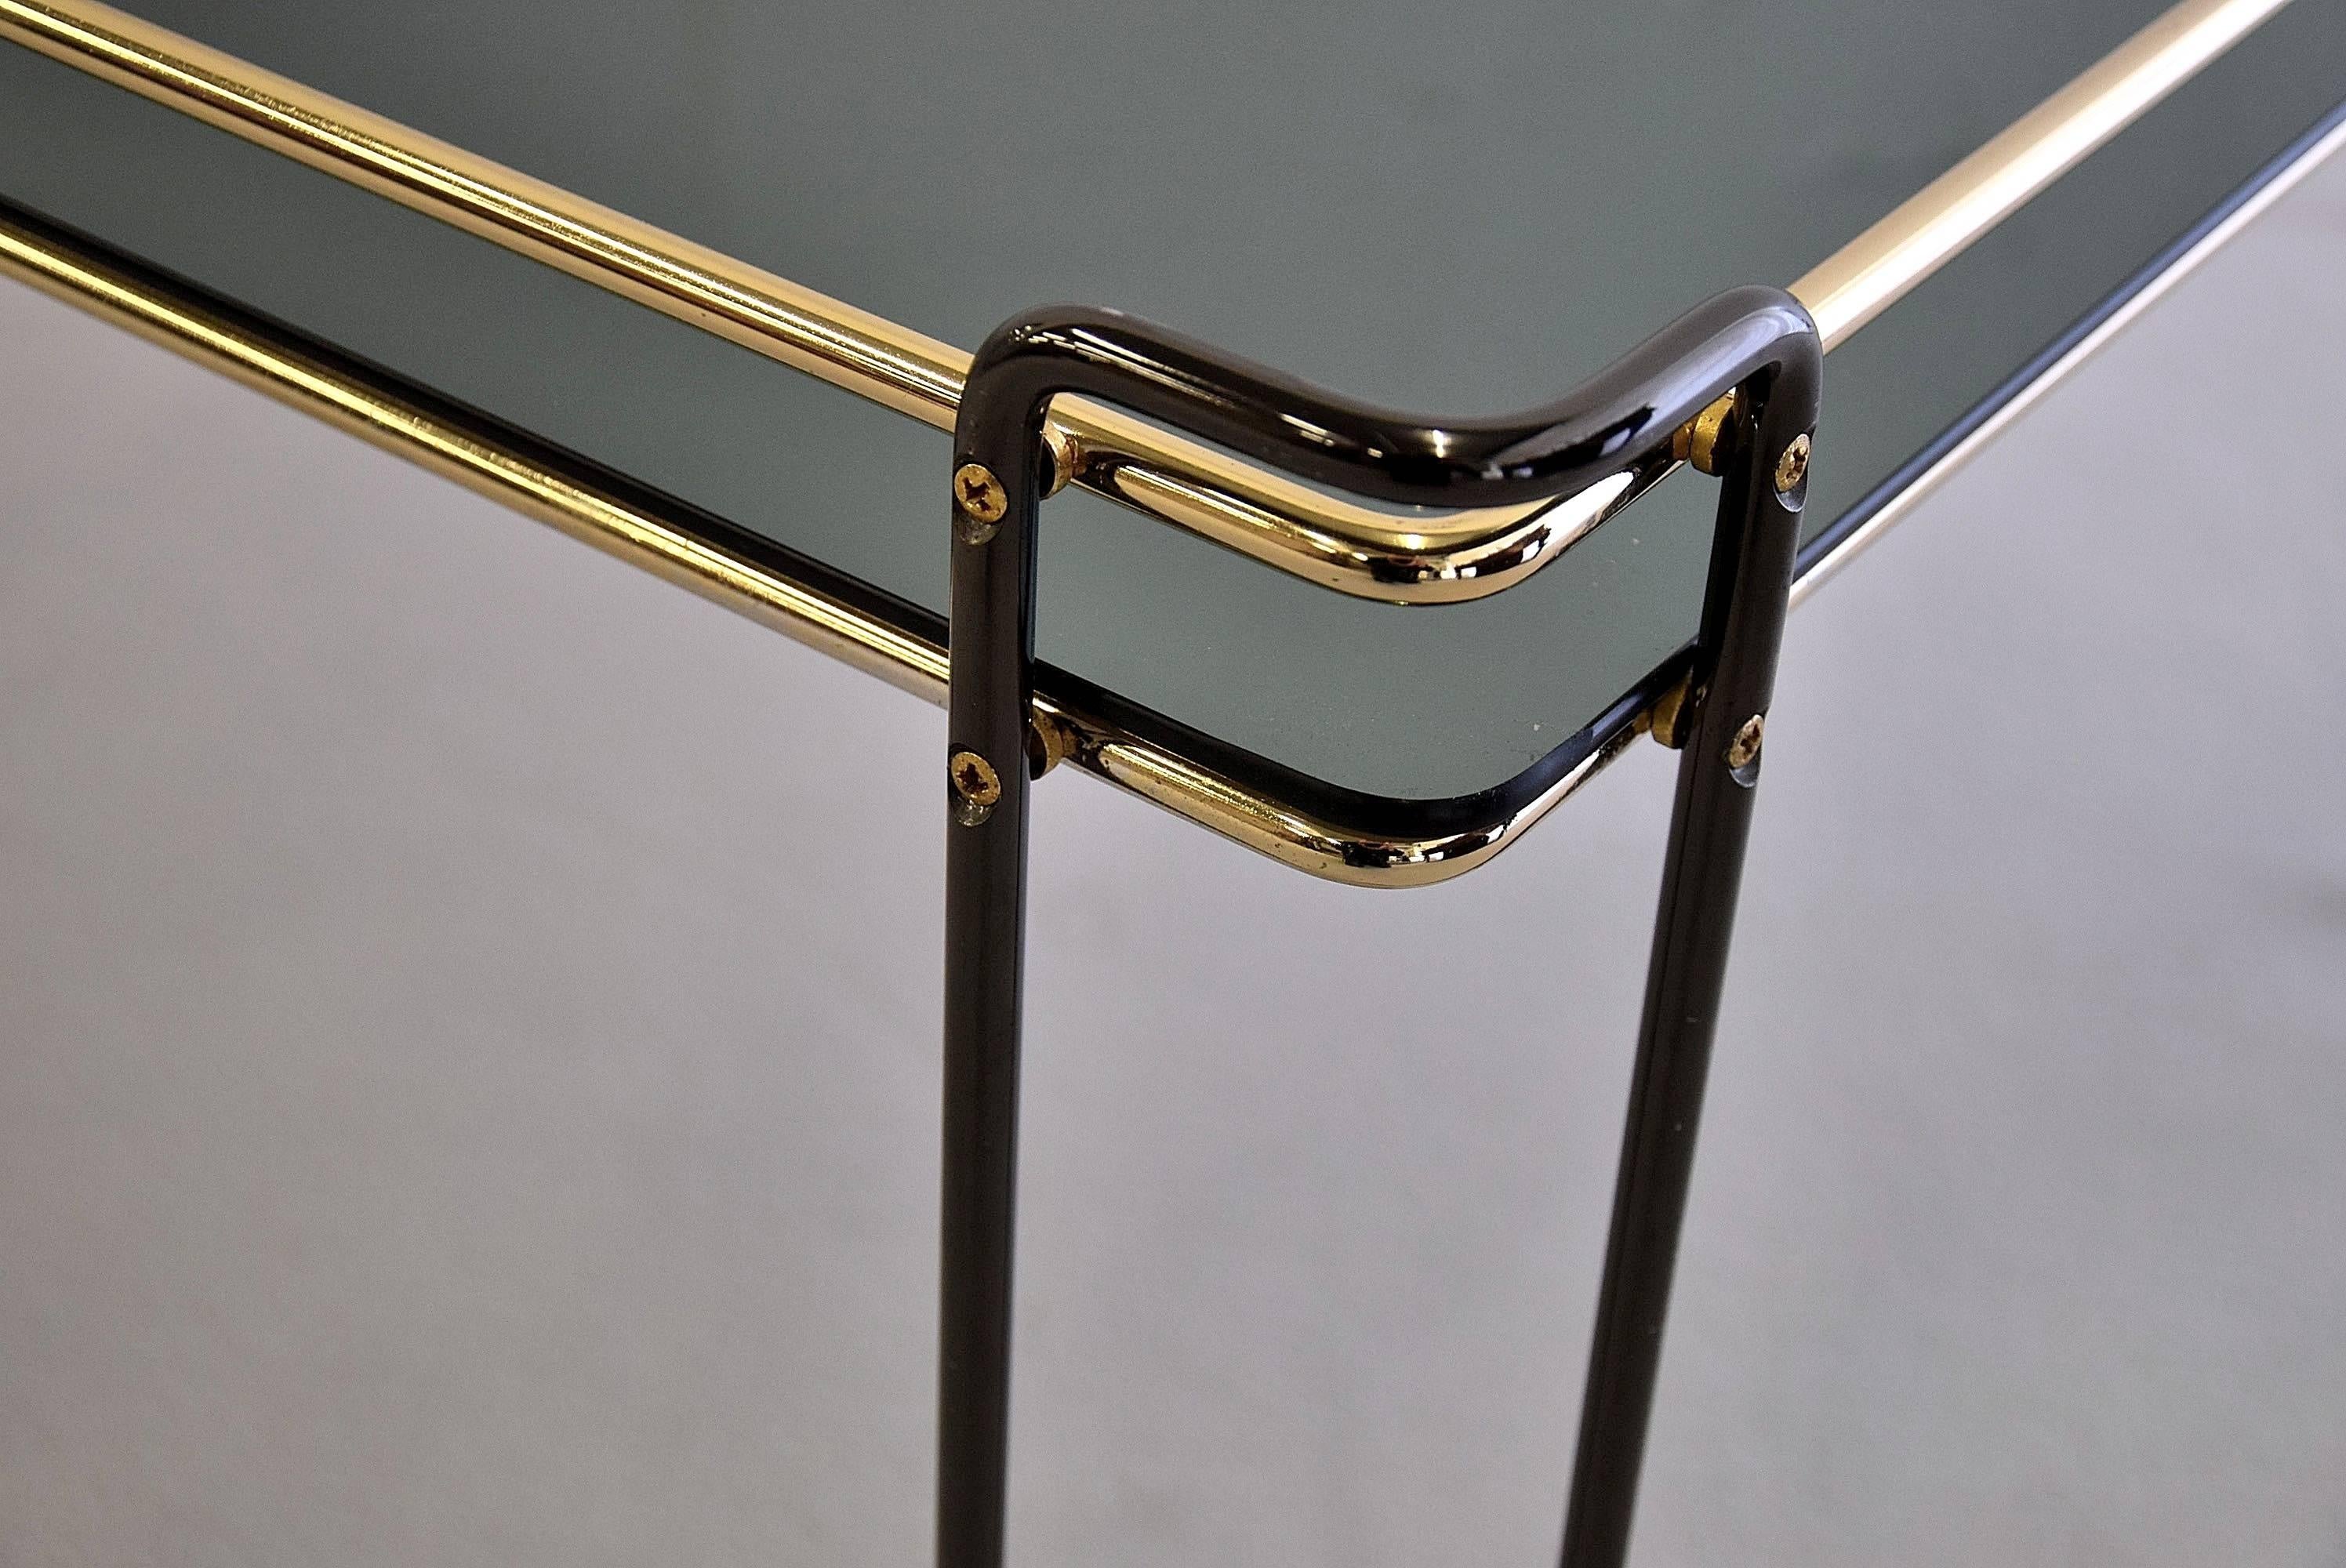 Elegant 1970s greenish smoke glass Italian side table with black and gold details.